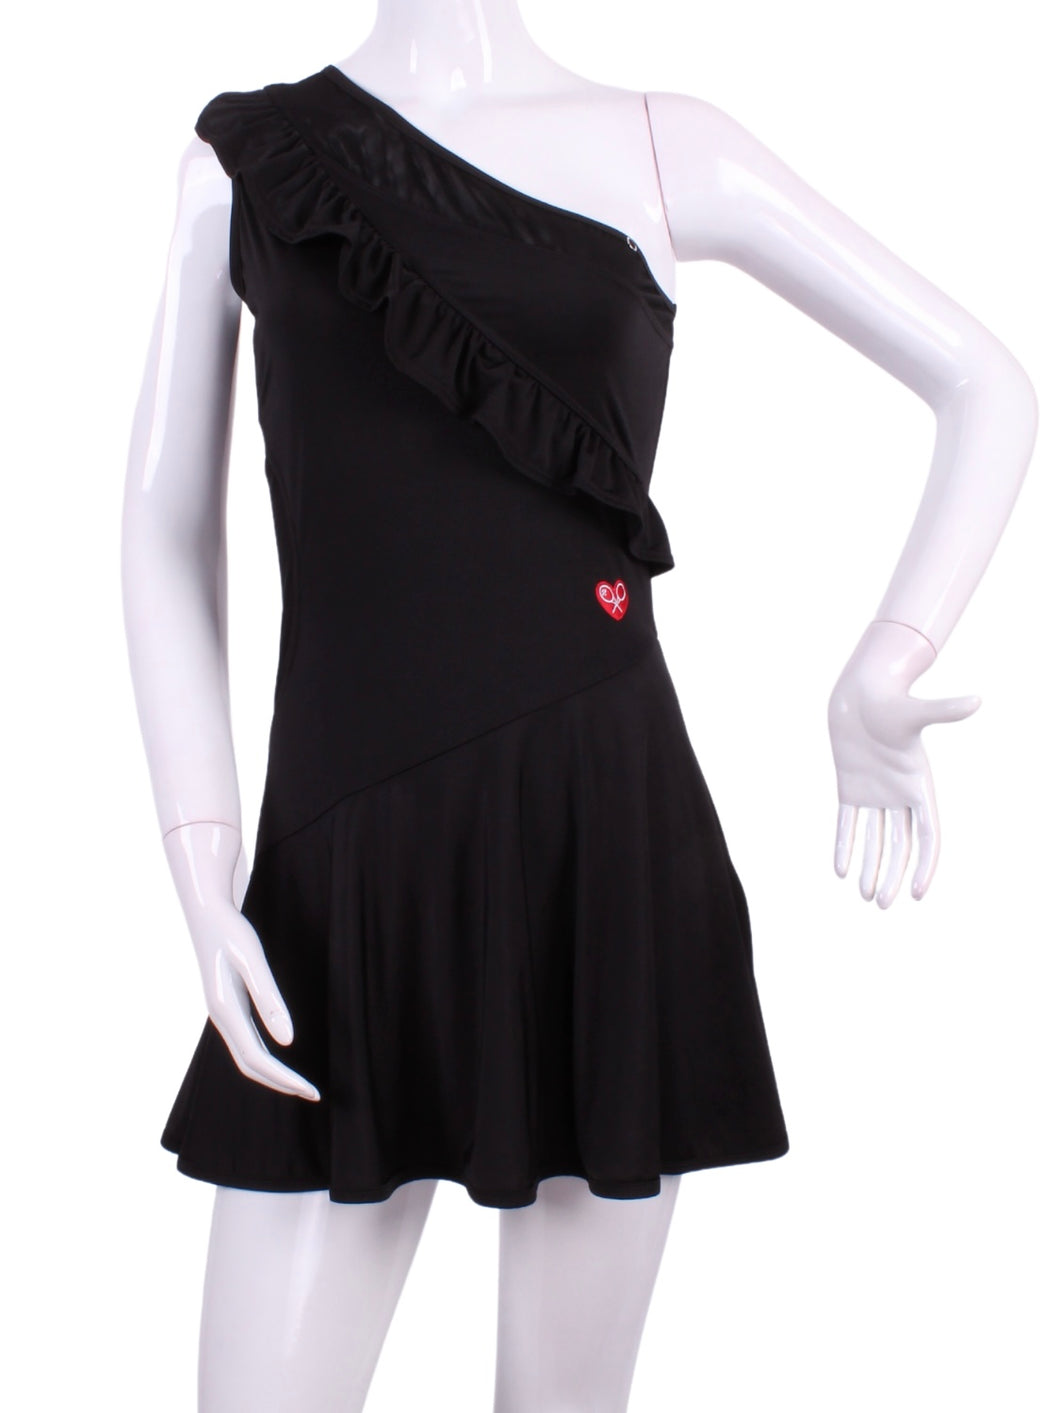 The Charmaine Court To Cocktails Tennis Dress in Black. Flirty and alluring.  That's the Charmaine tennis dress.  Wear this sexy dress from the court to cocktails.  The off the shoulder neck, asymmetrical lines, and side slit make this our most sexy dress.  It is a fitted cut, but lined to give support, and is sewn with our silky soft stretchy fabric.  This dress is short, it sits high on the thigh.  This dress comes with its own one-sided matching soft bra to wear underneath.